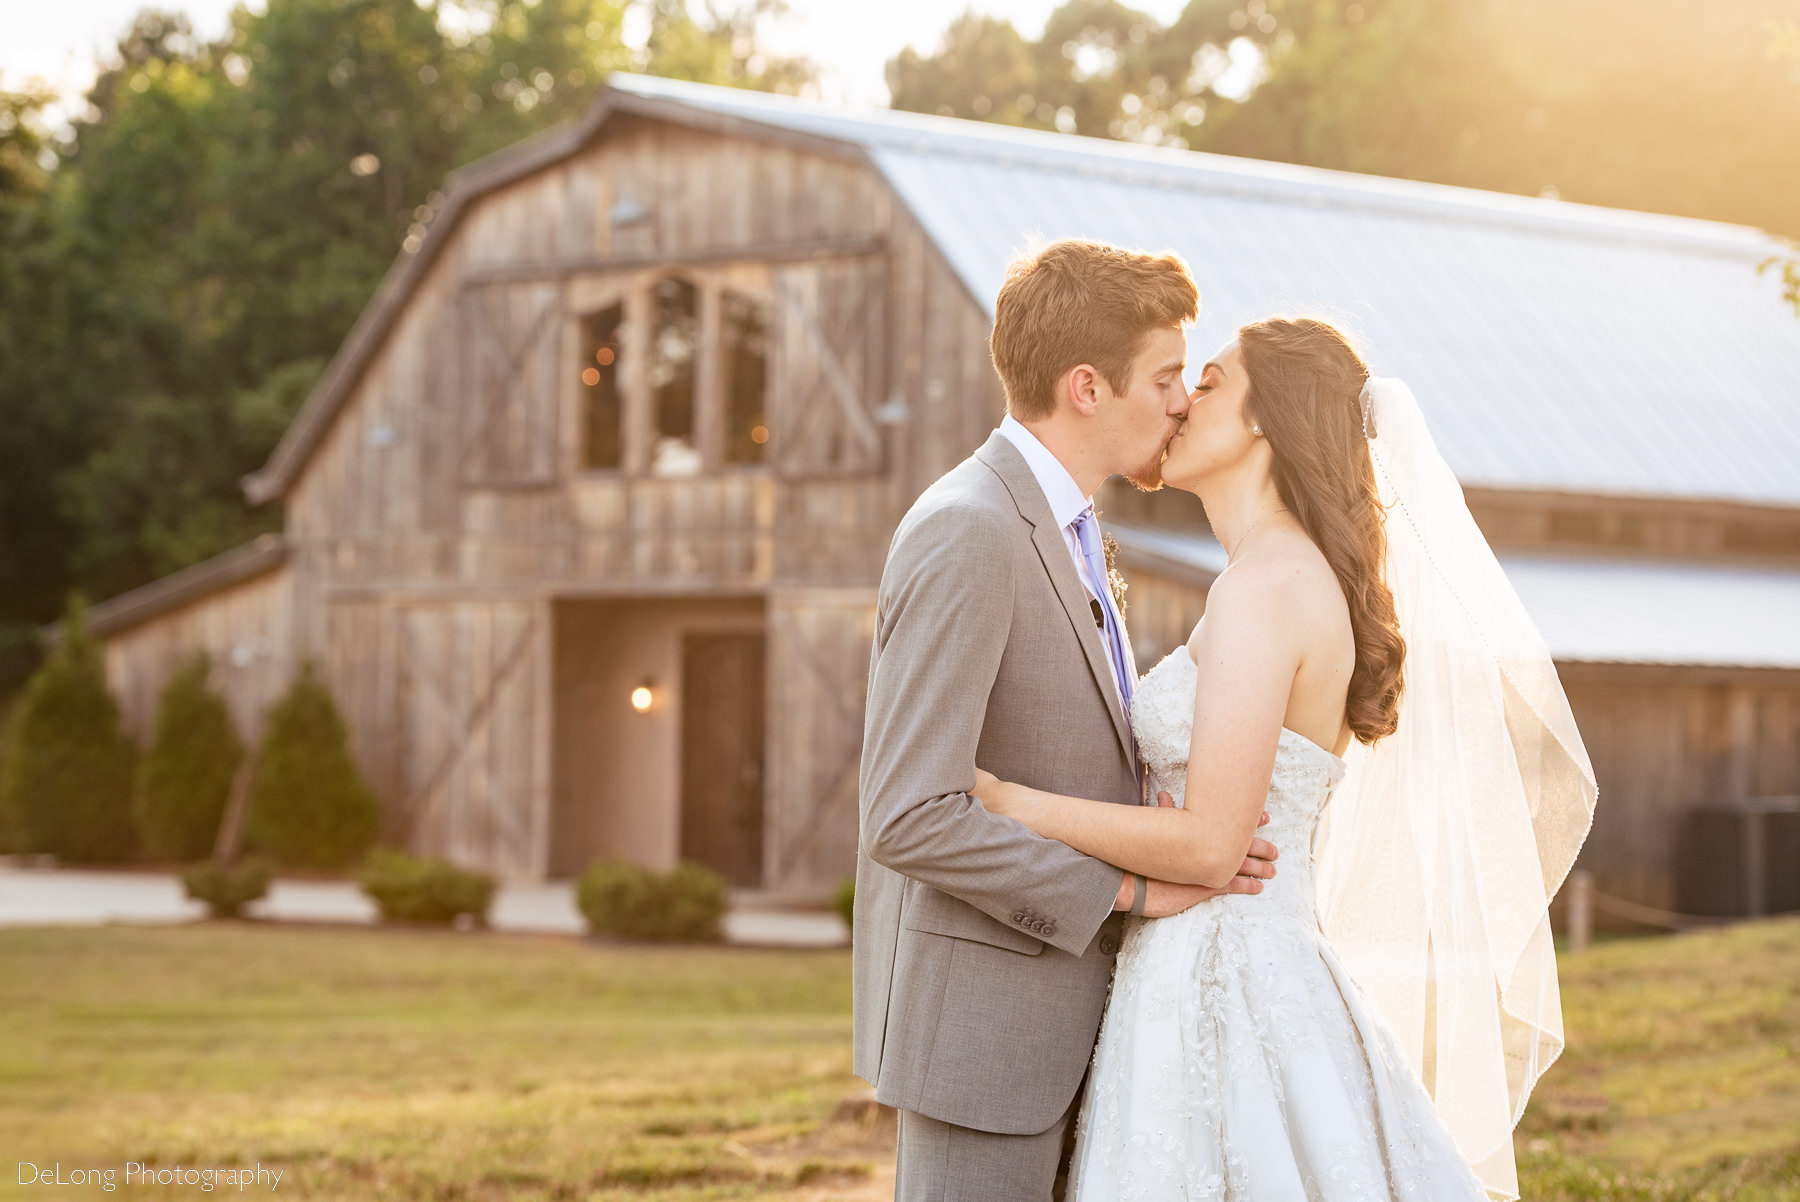 Outdoor portrait of bride and groom kissing during sunset showing the barn in the background at Lady Bird Farms by Charlotte Wedding Photographers DeLong Photography